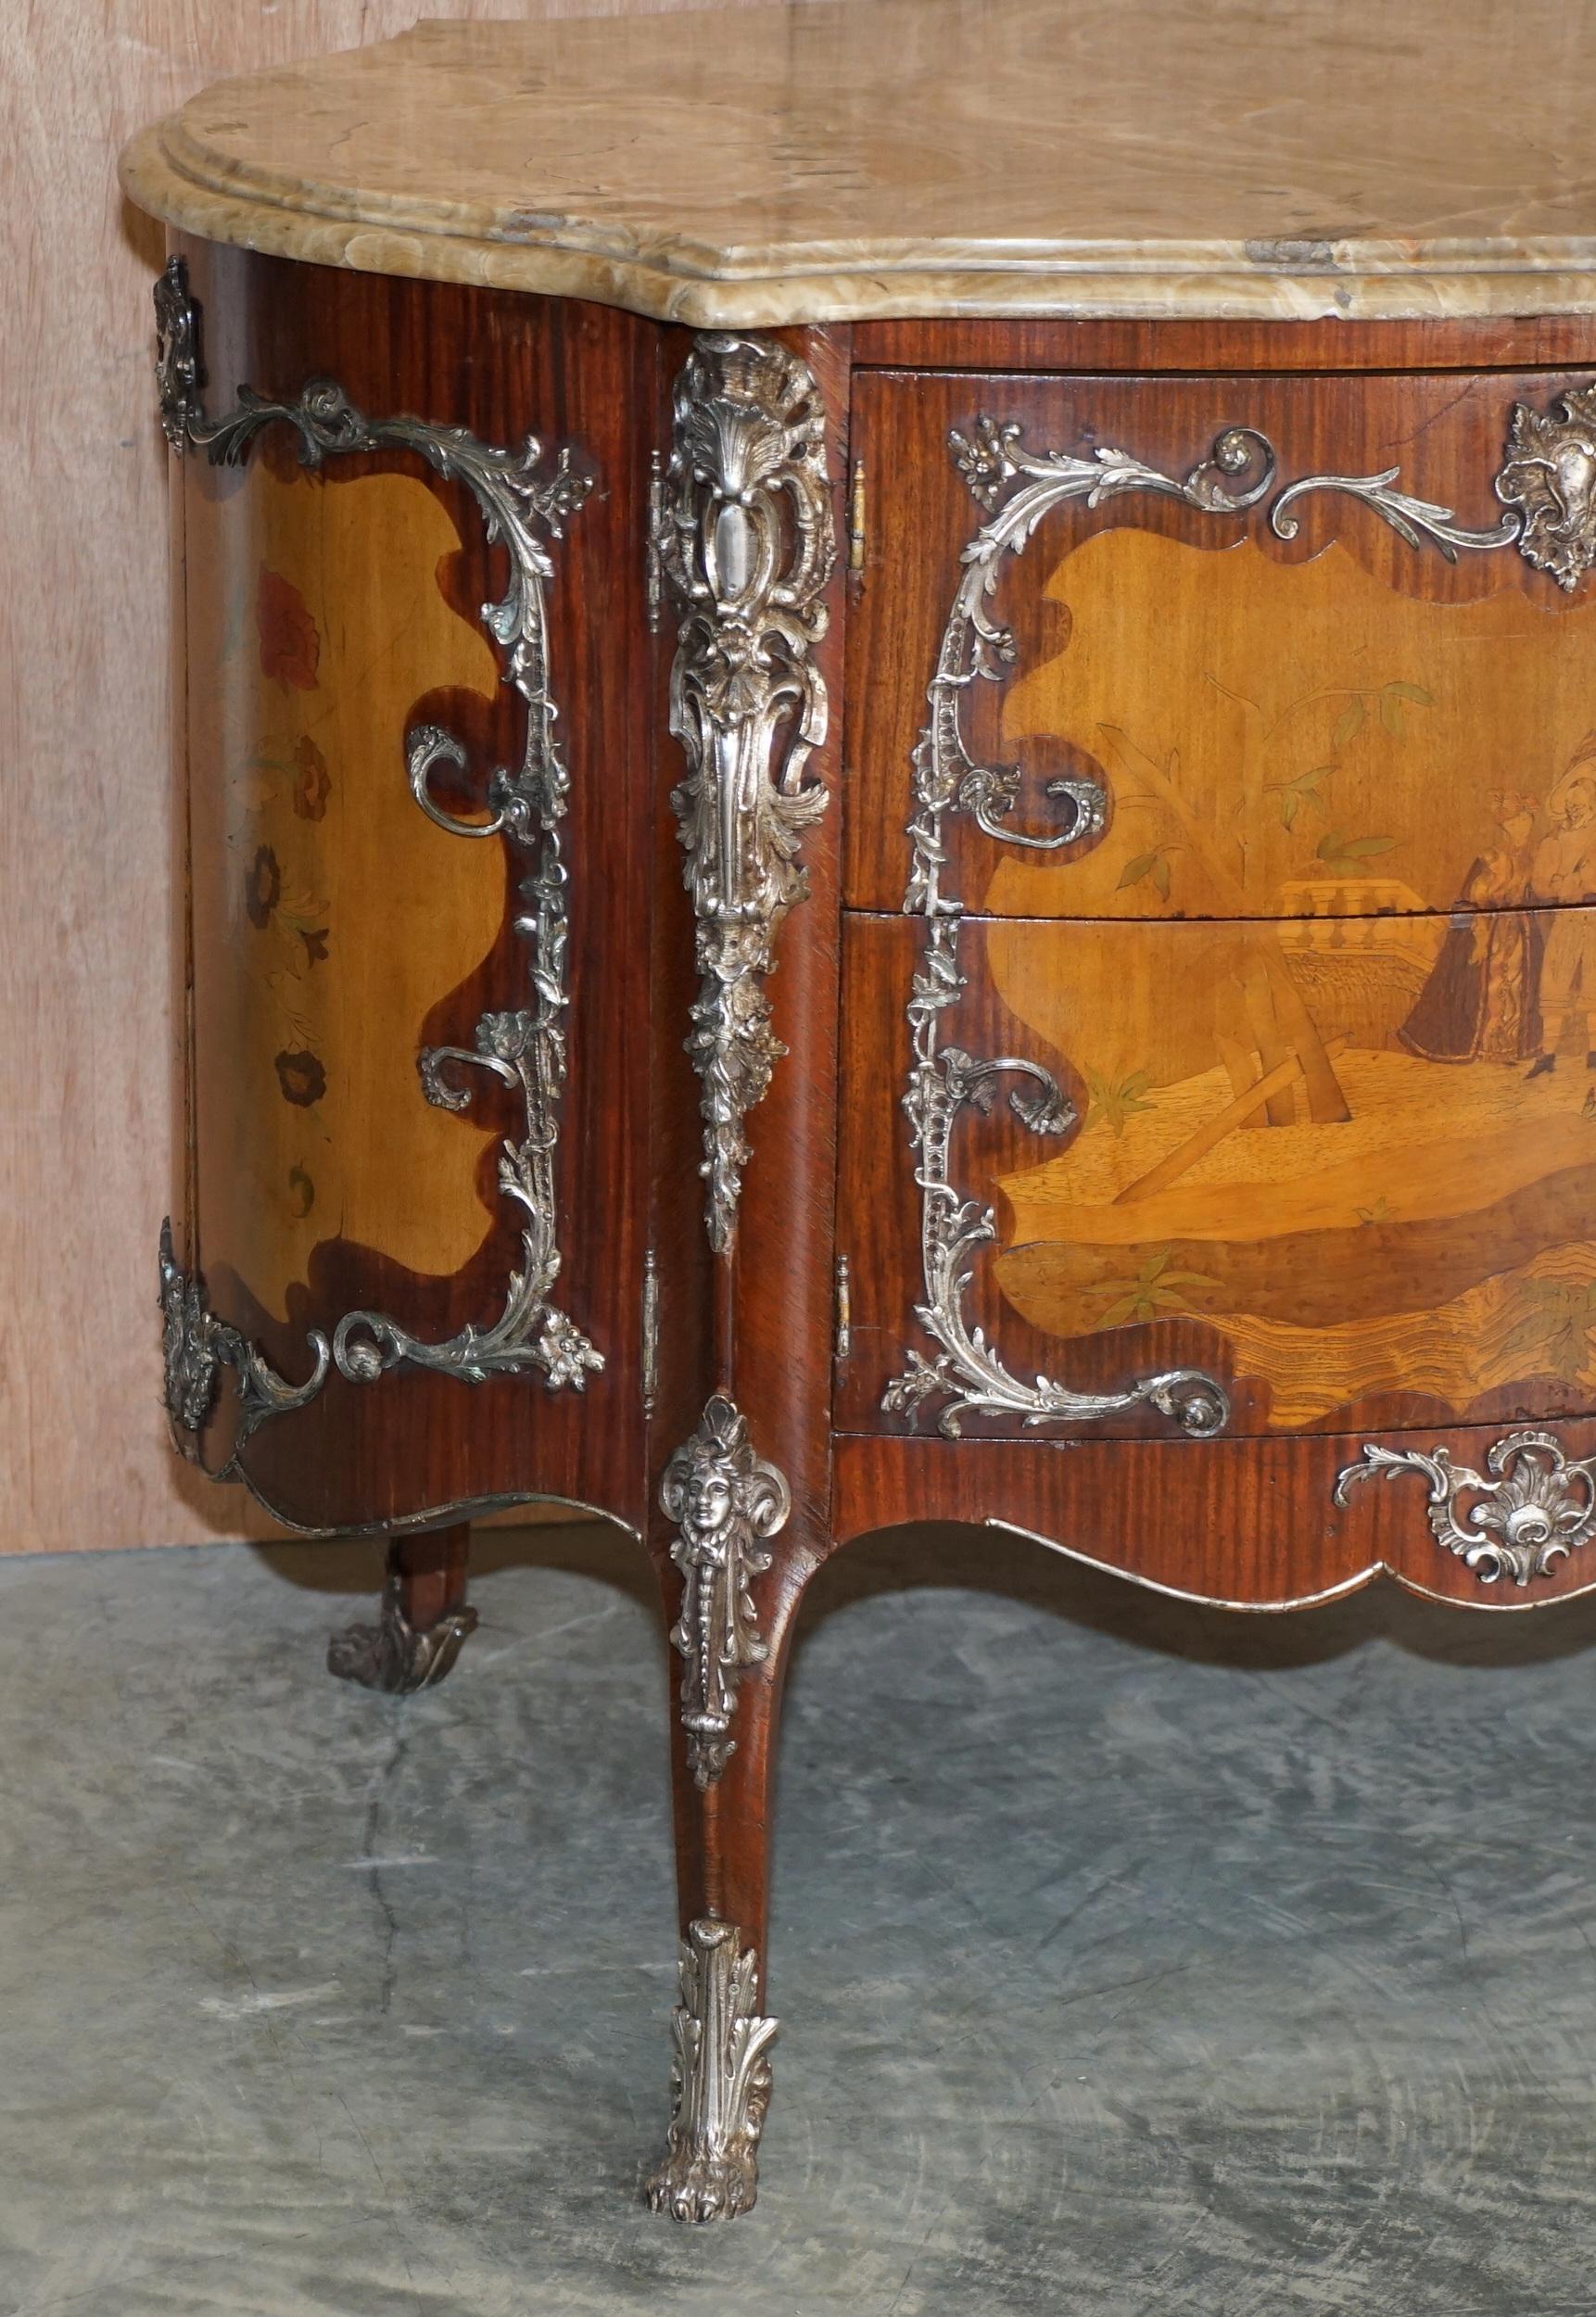 Hand-Crafted Rare & Collectable Germain Landrin circa 1750 French Marble Kingwood Sideboard For Sale